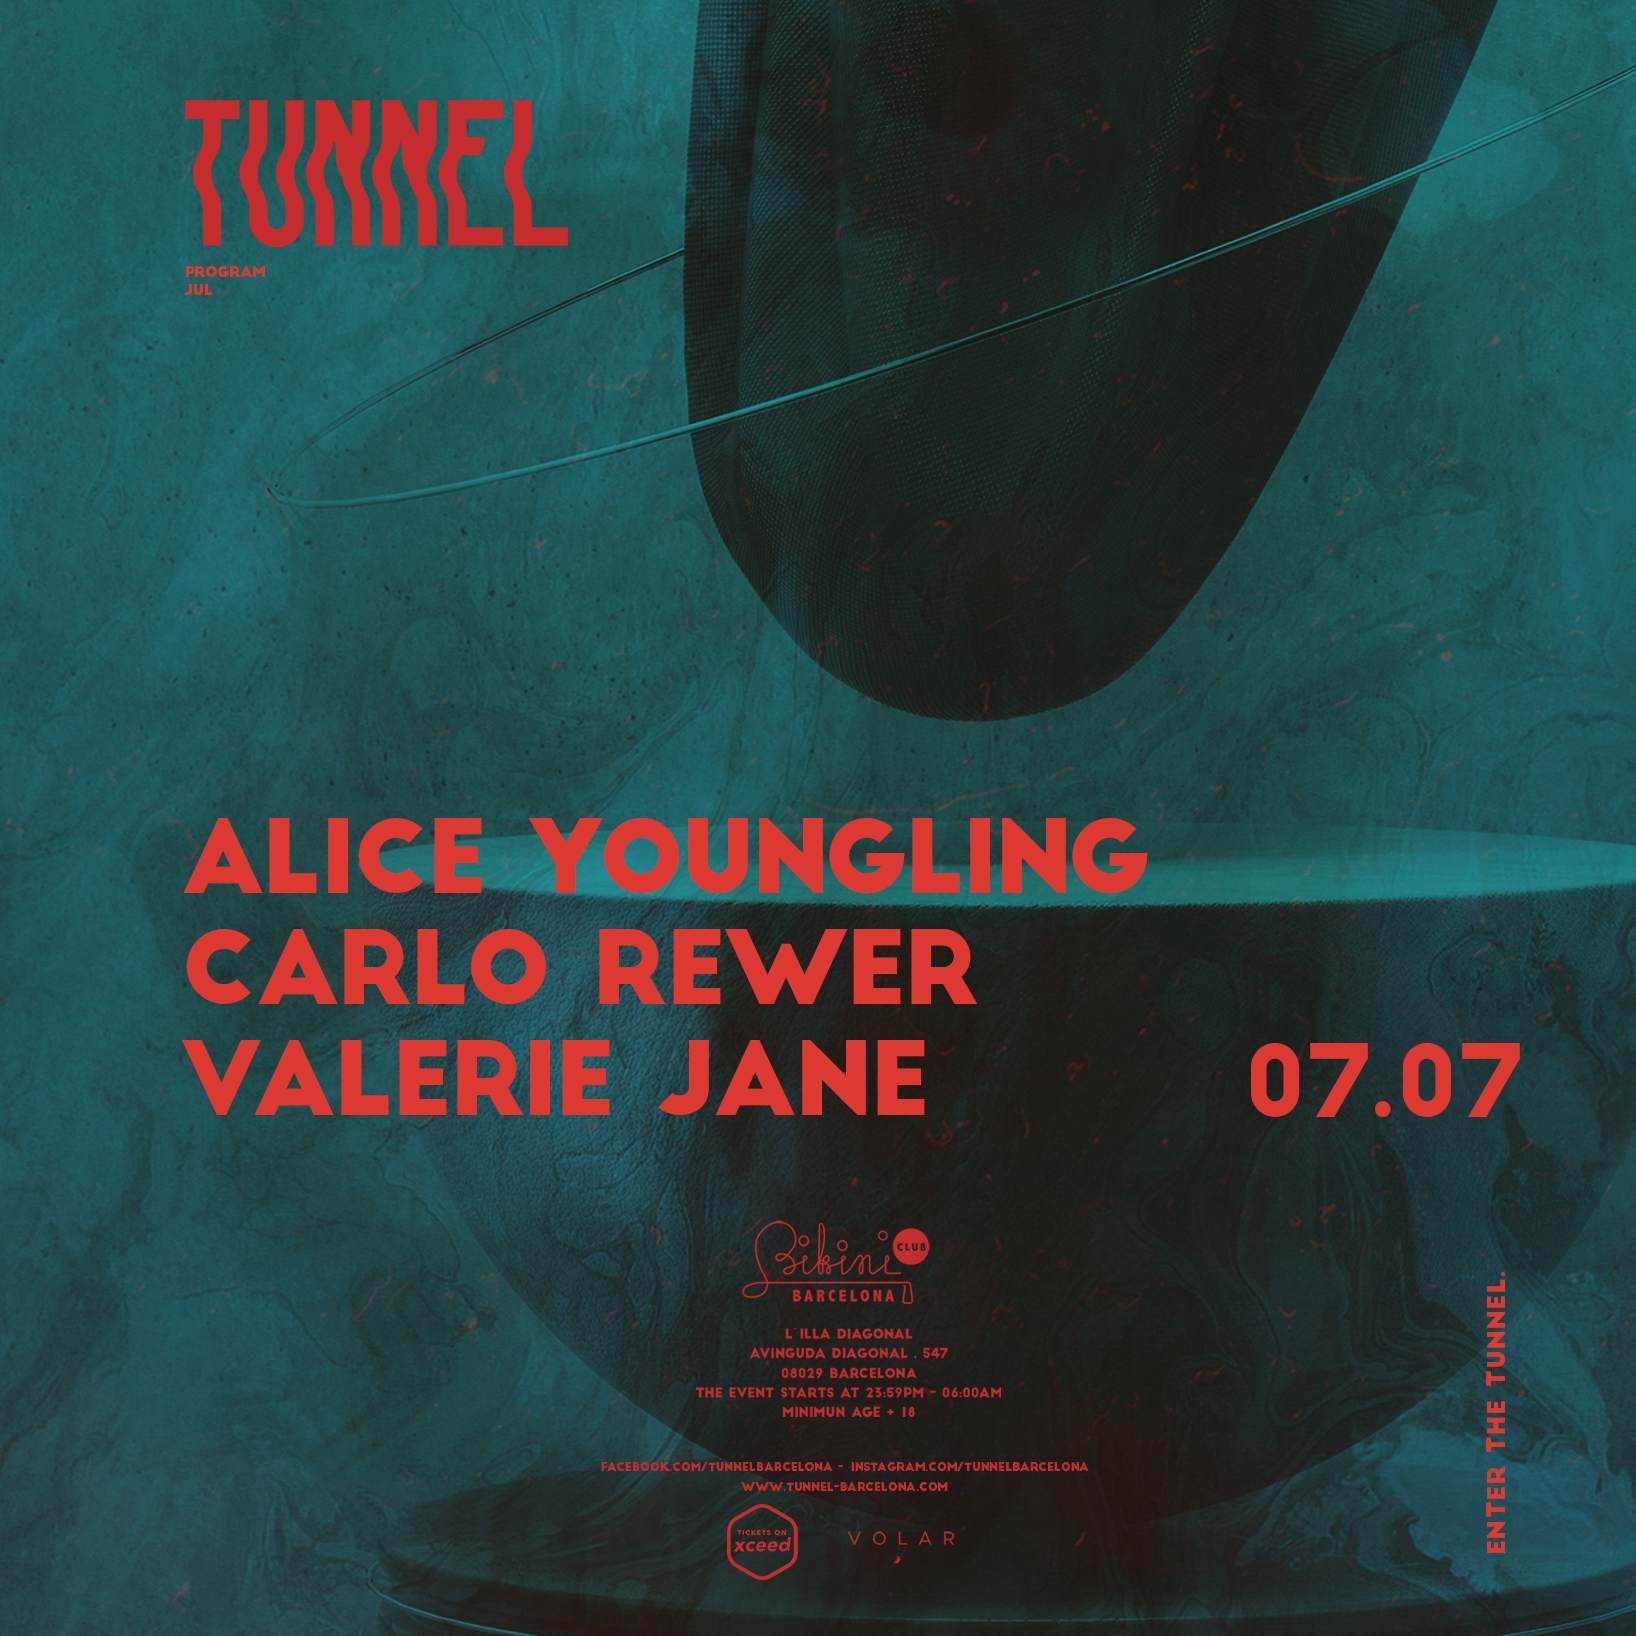 Tunnel pres: Alice Youngling, Carlo Rewer, Valerie Jane - フライヤー裏